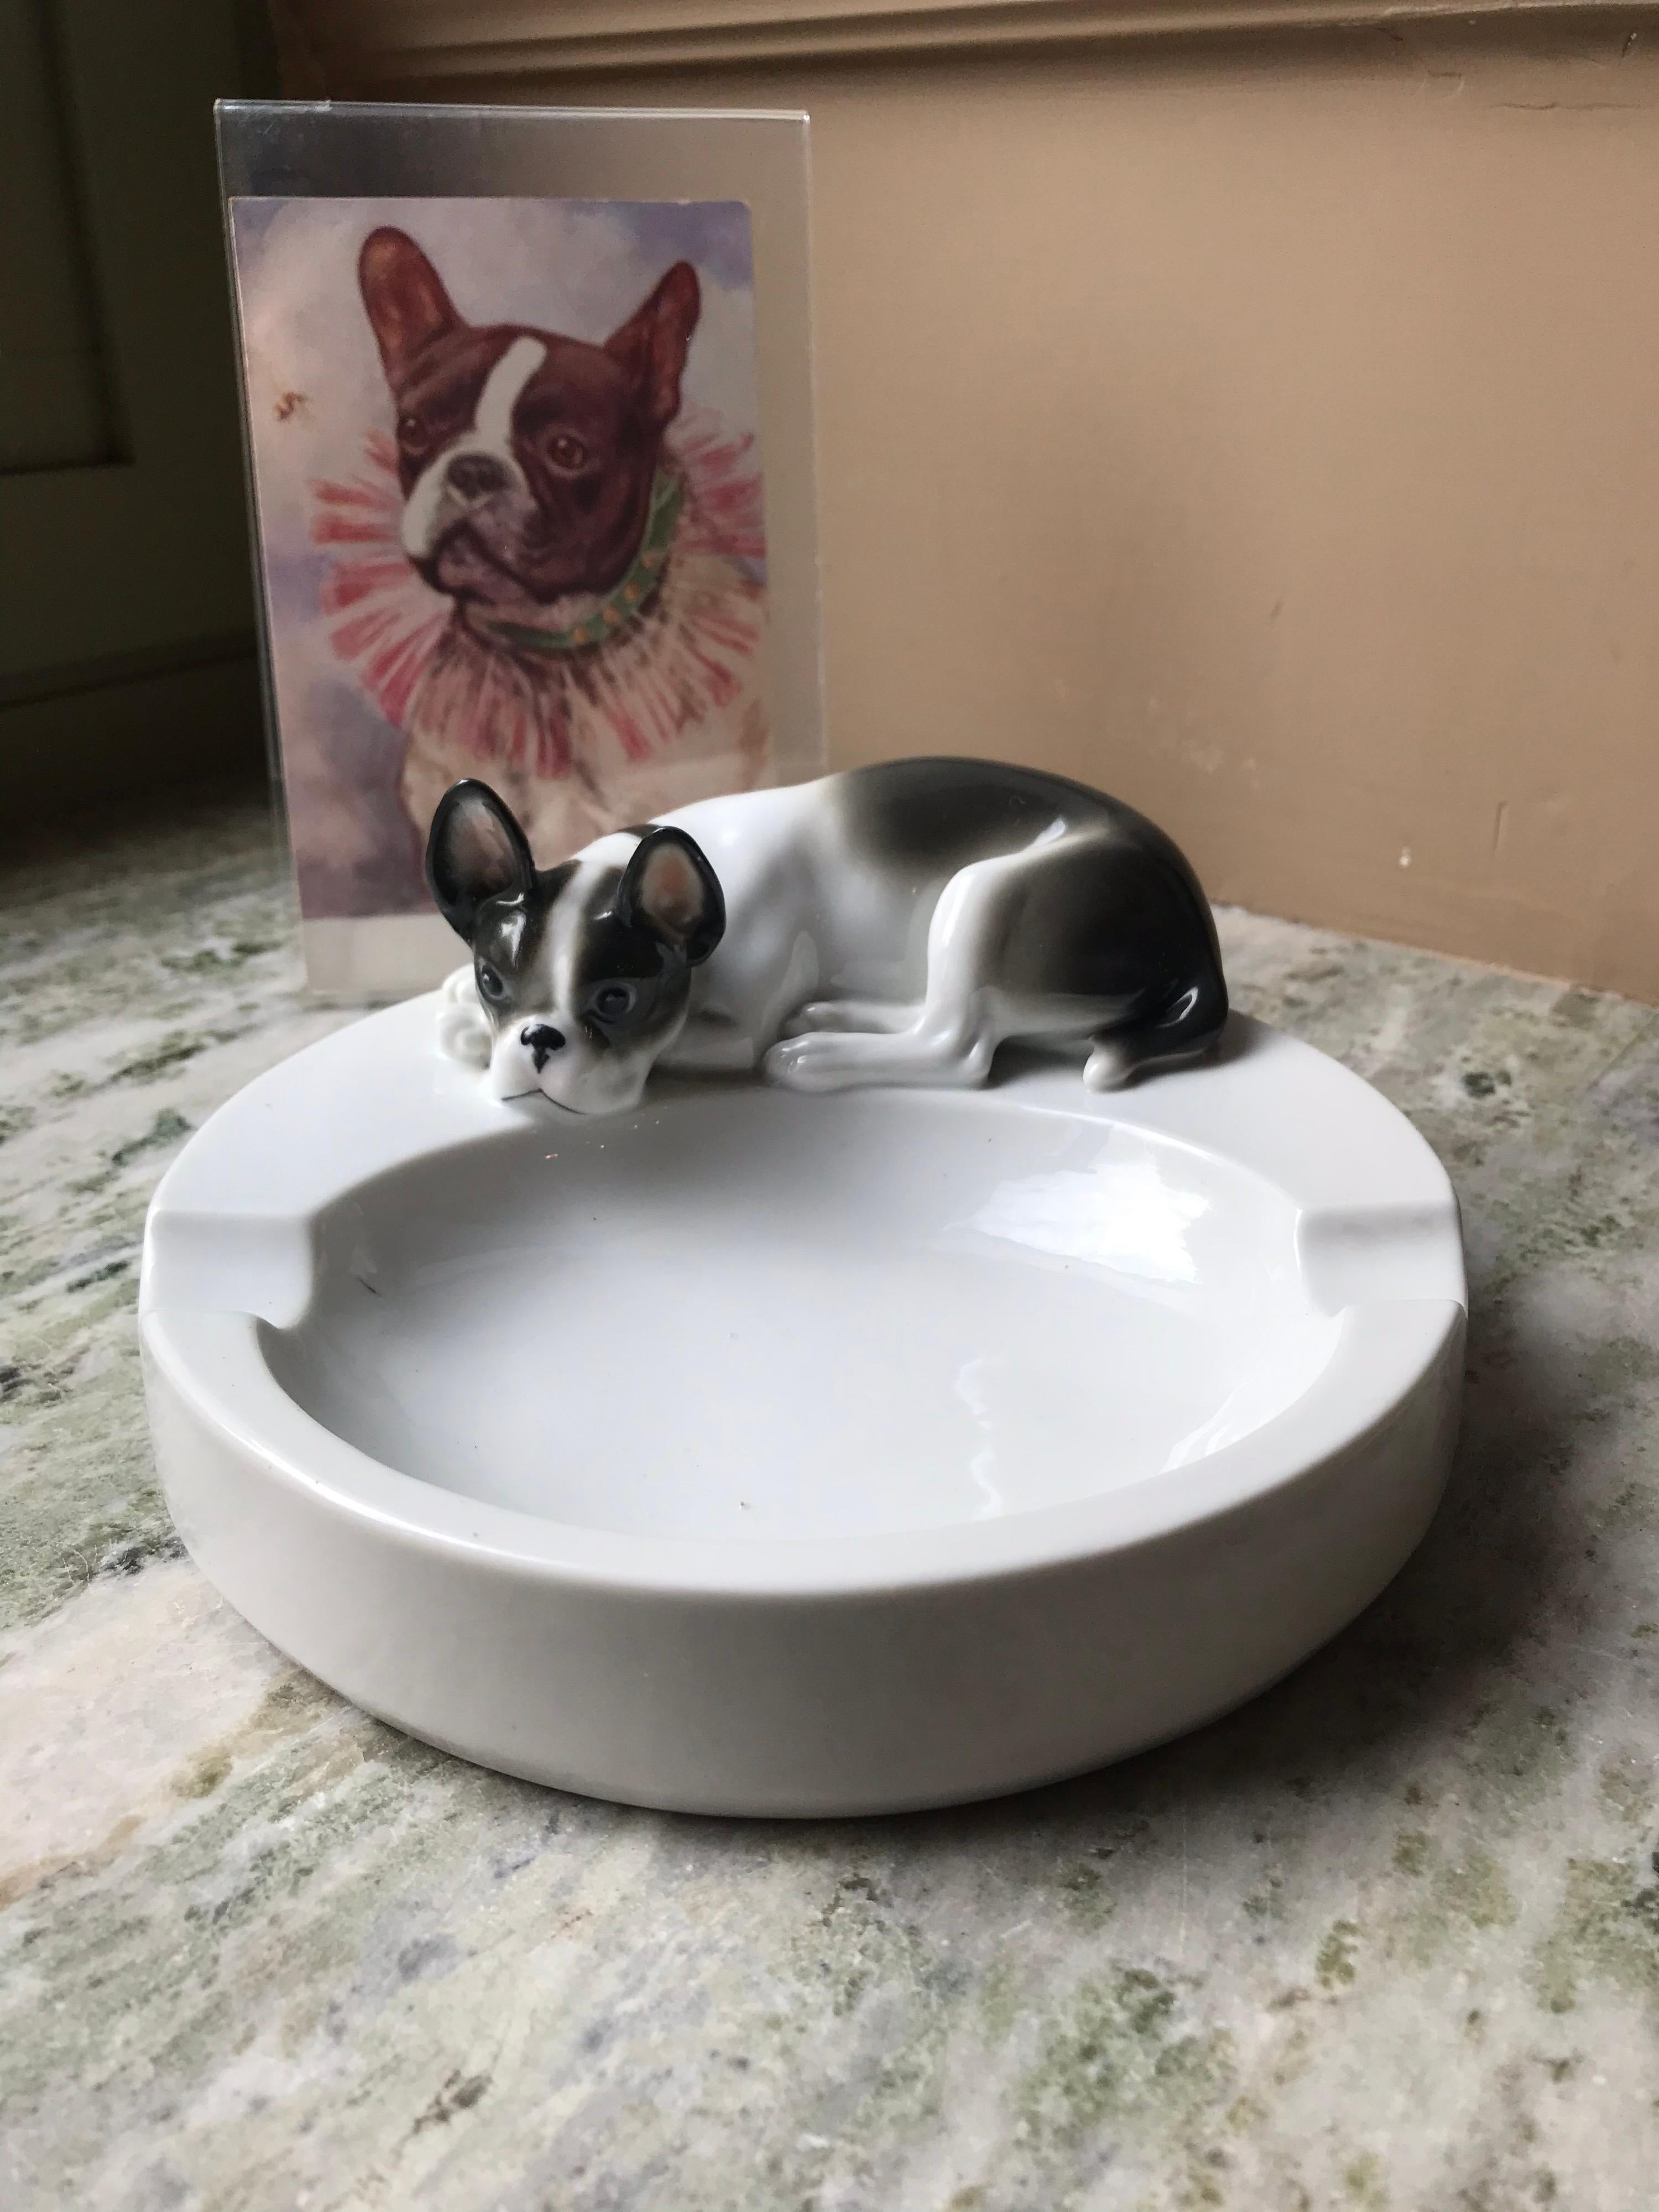 1930s Porcelain Ashtray with French Bulldog by Pfeffer Gotha , Germany  In Good Condition For Sale In Antwerp, BE